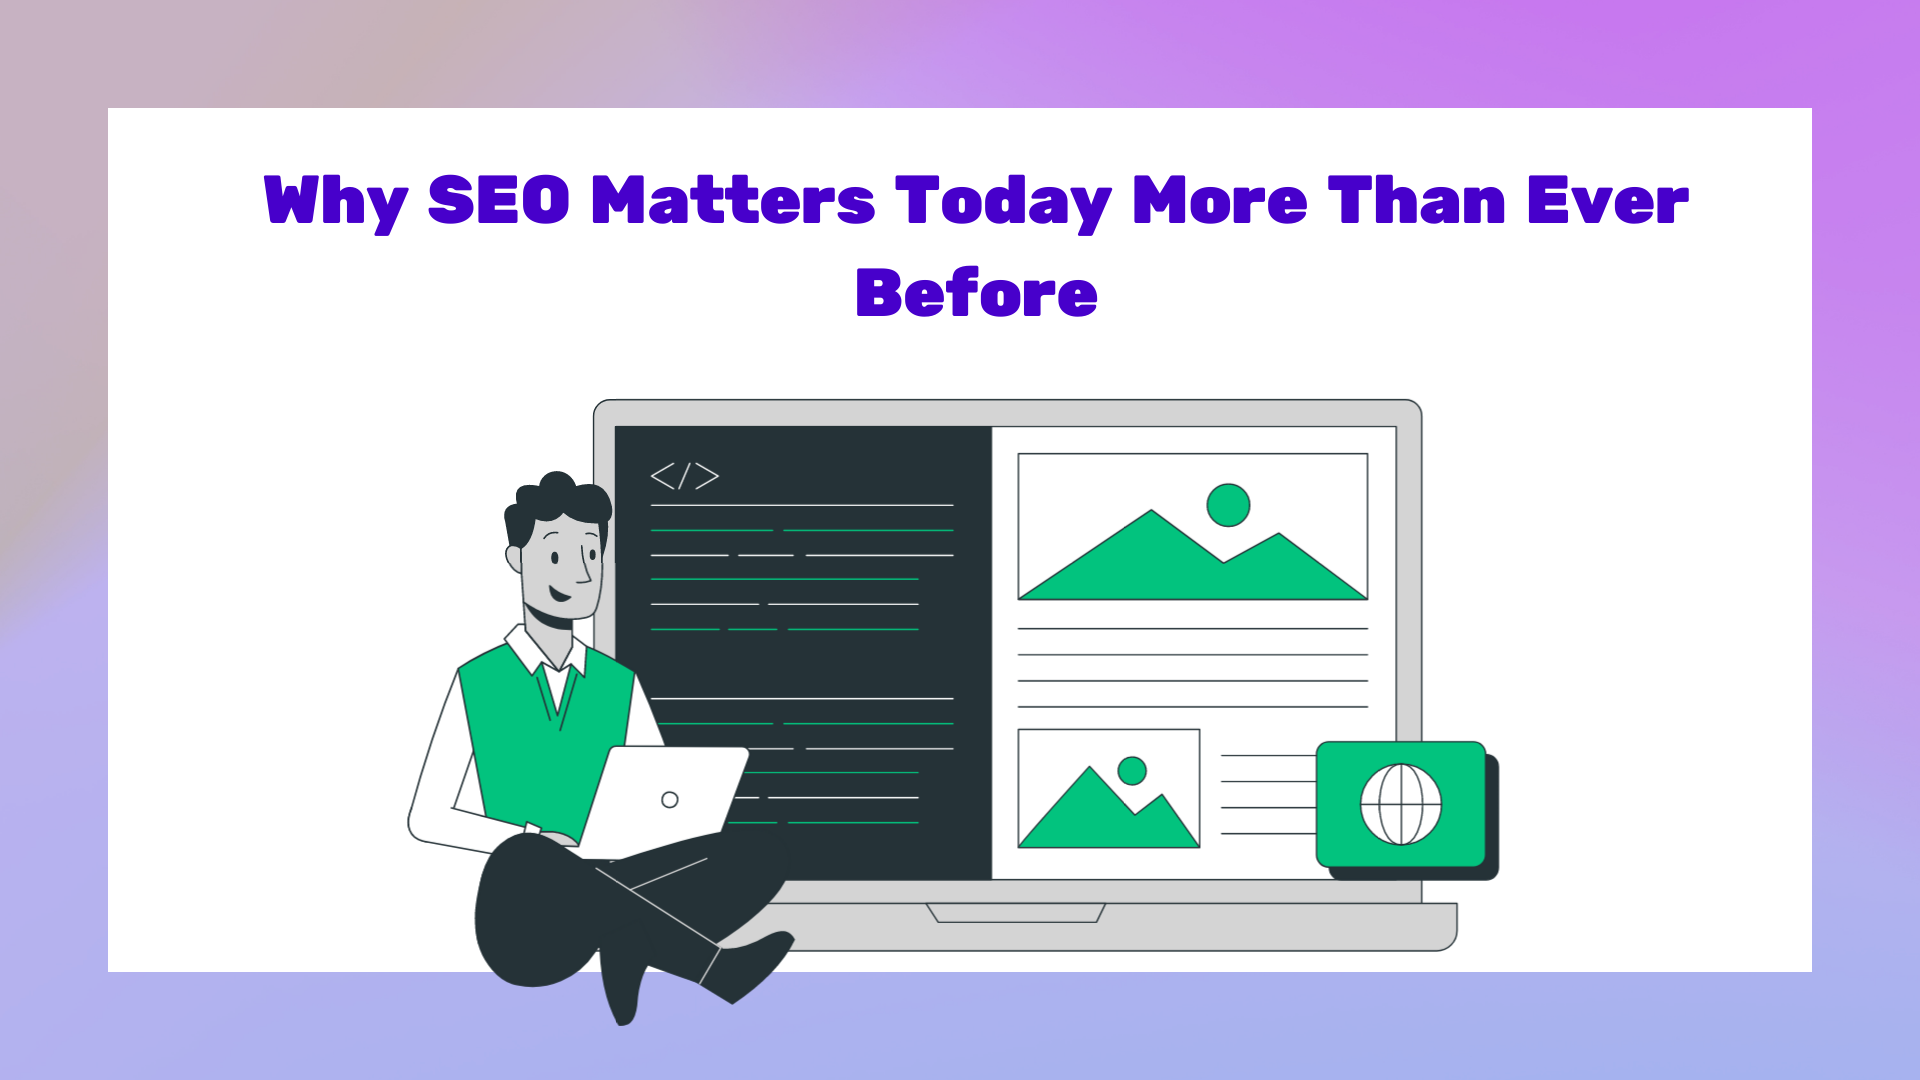 Why SEO Matters Today More Than Ever Before